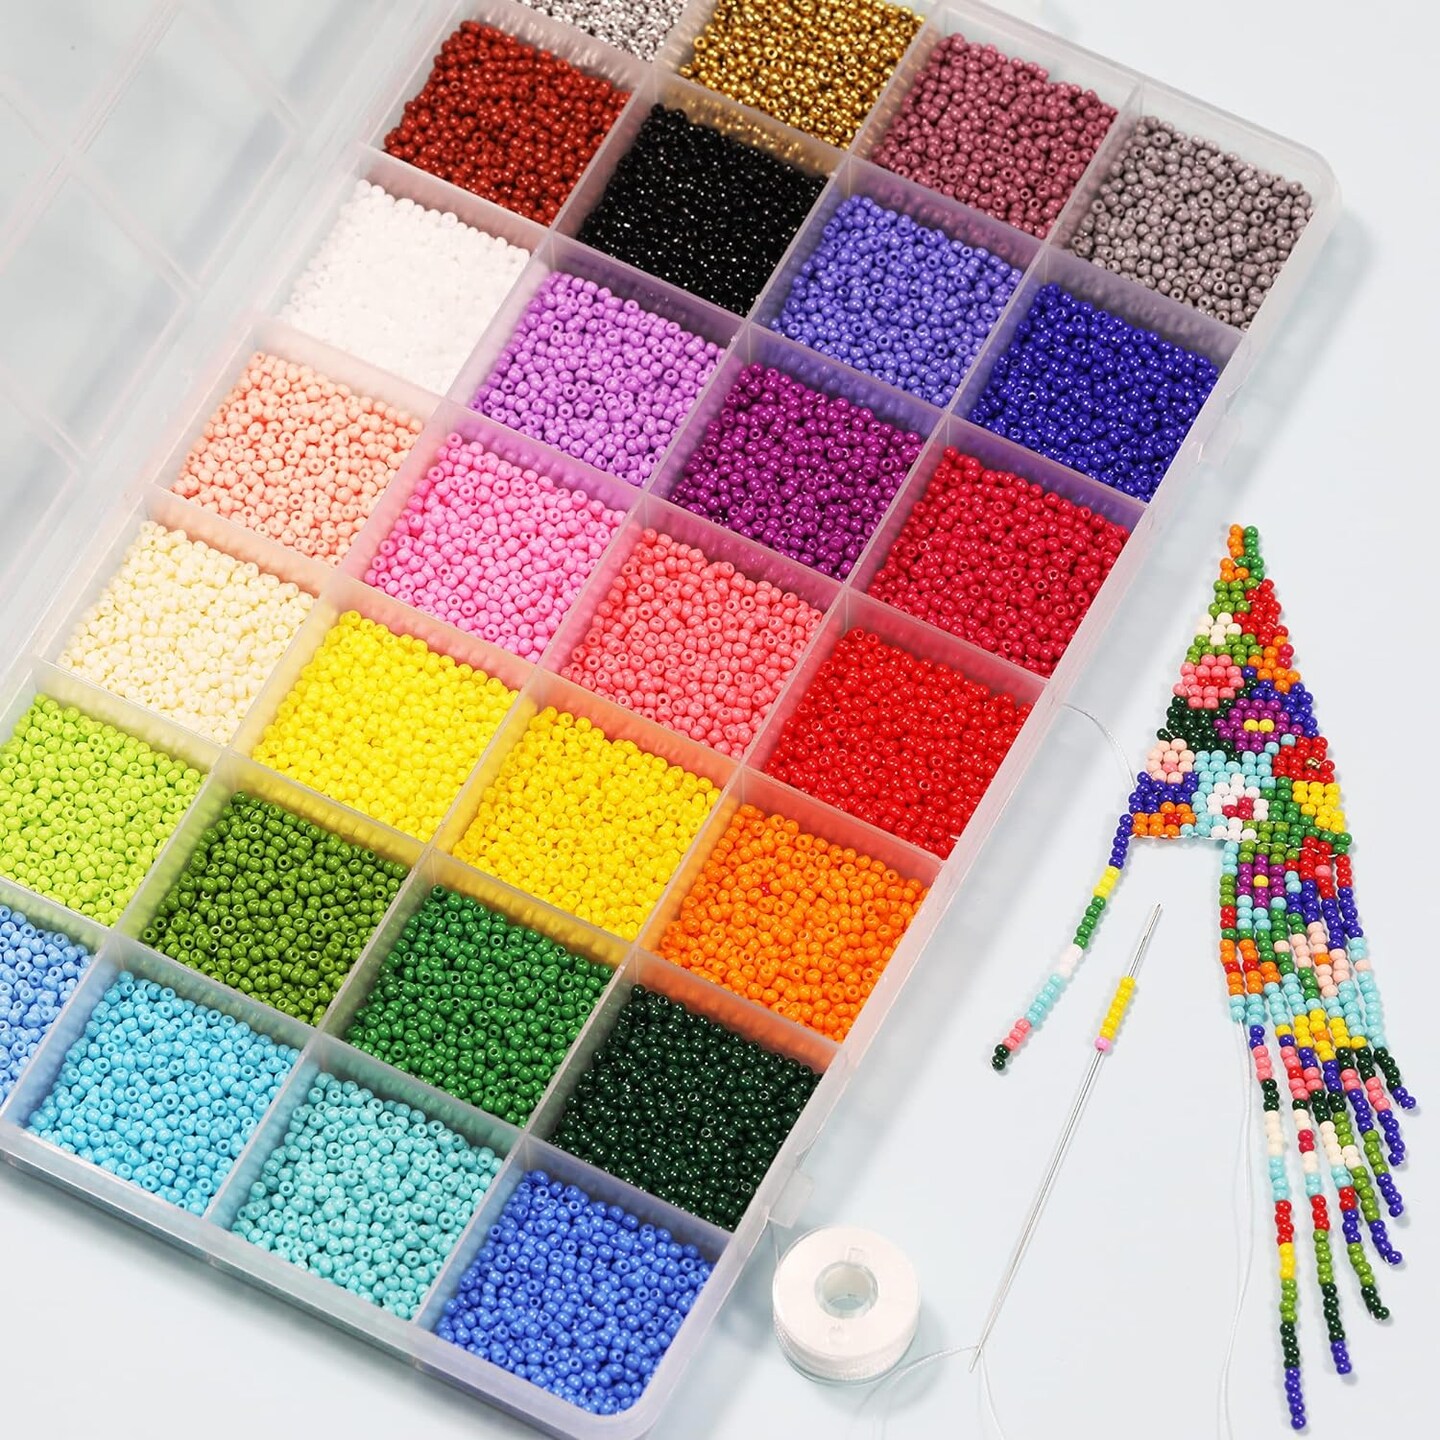 2mm Round 12/0 Seed Beads About 20000pcs in Box 28 Crayon Colors Seed Beads for Making Jewelry